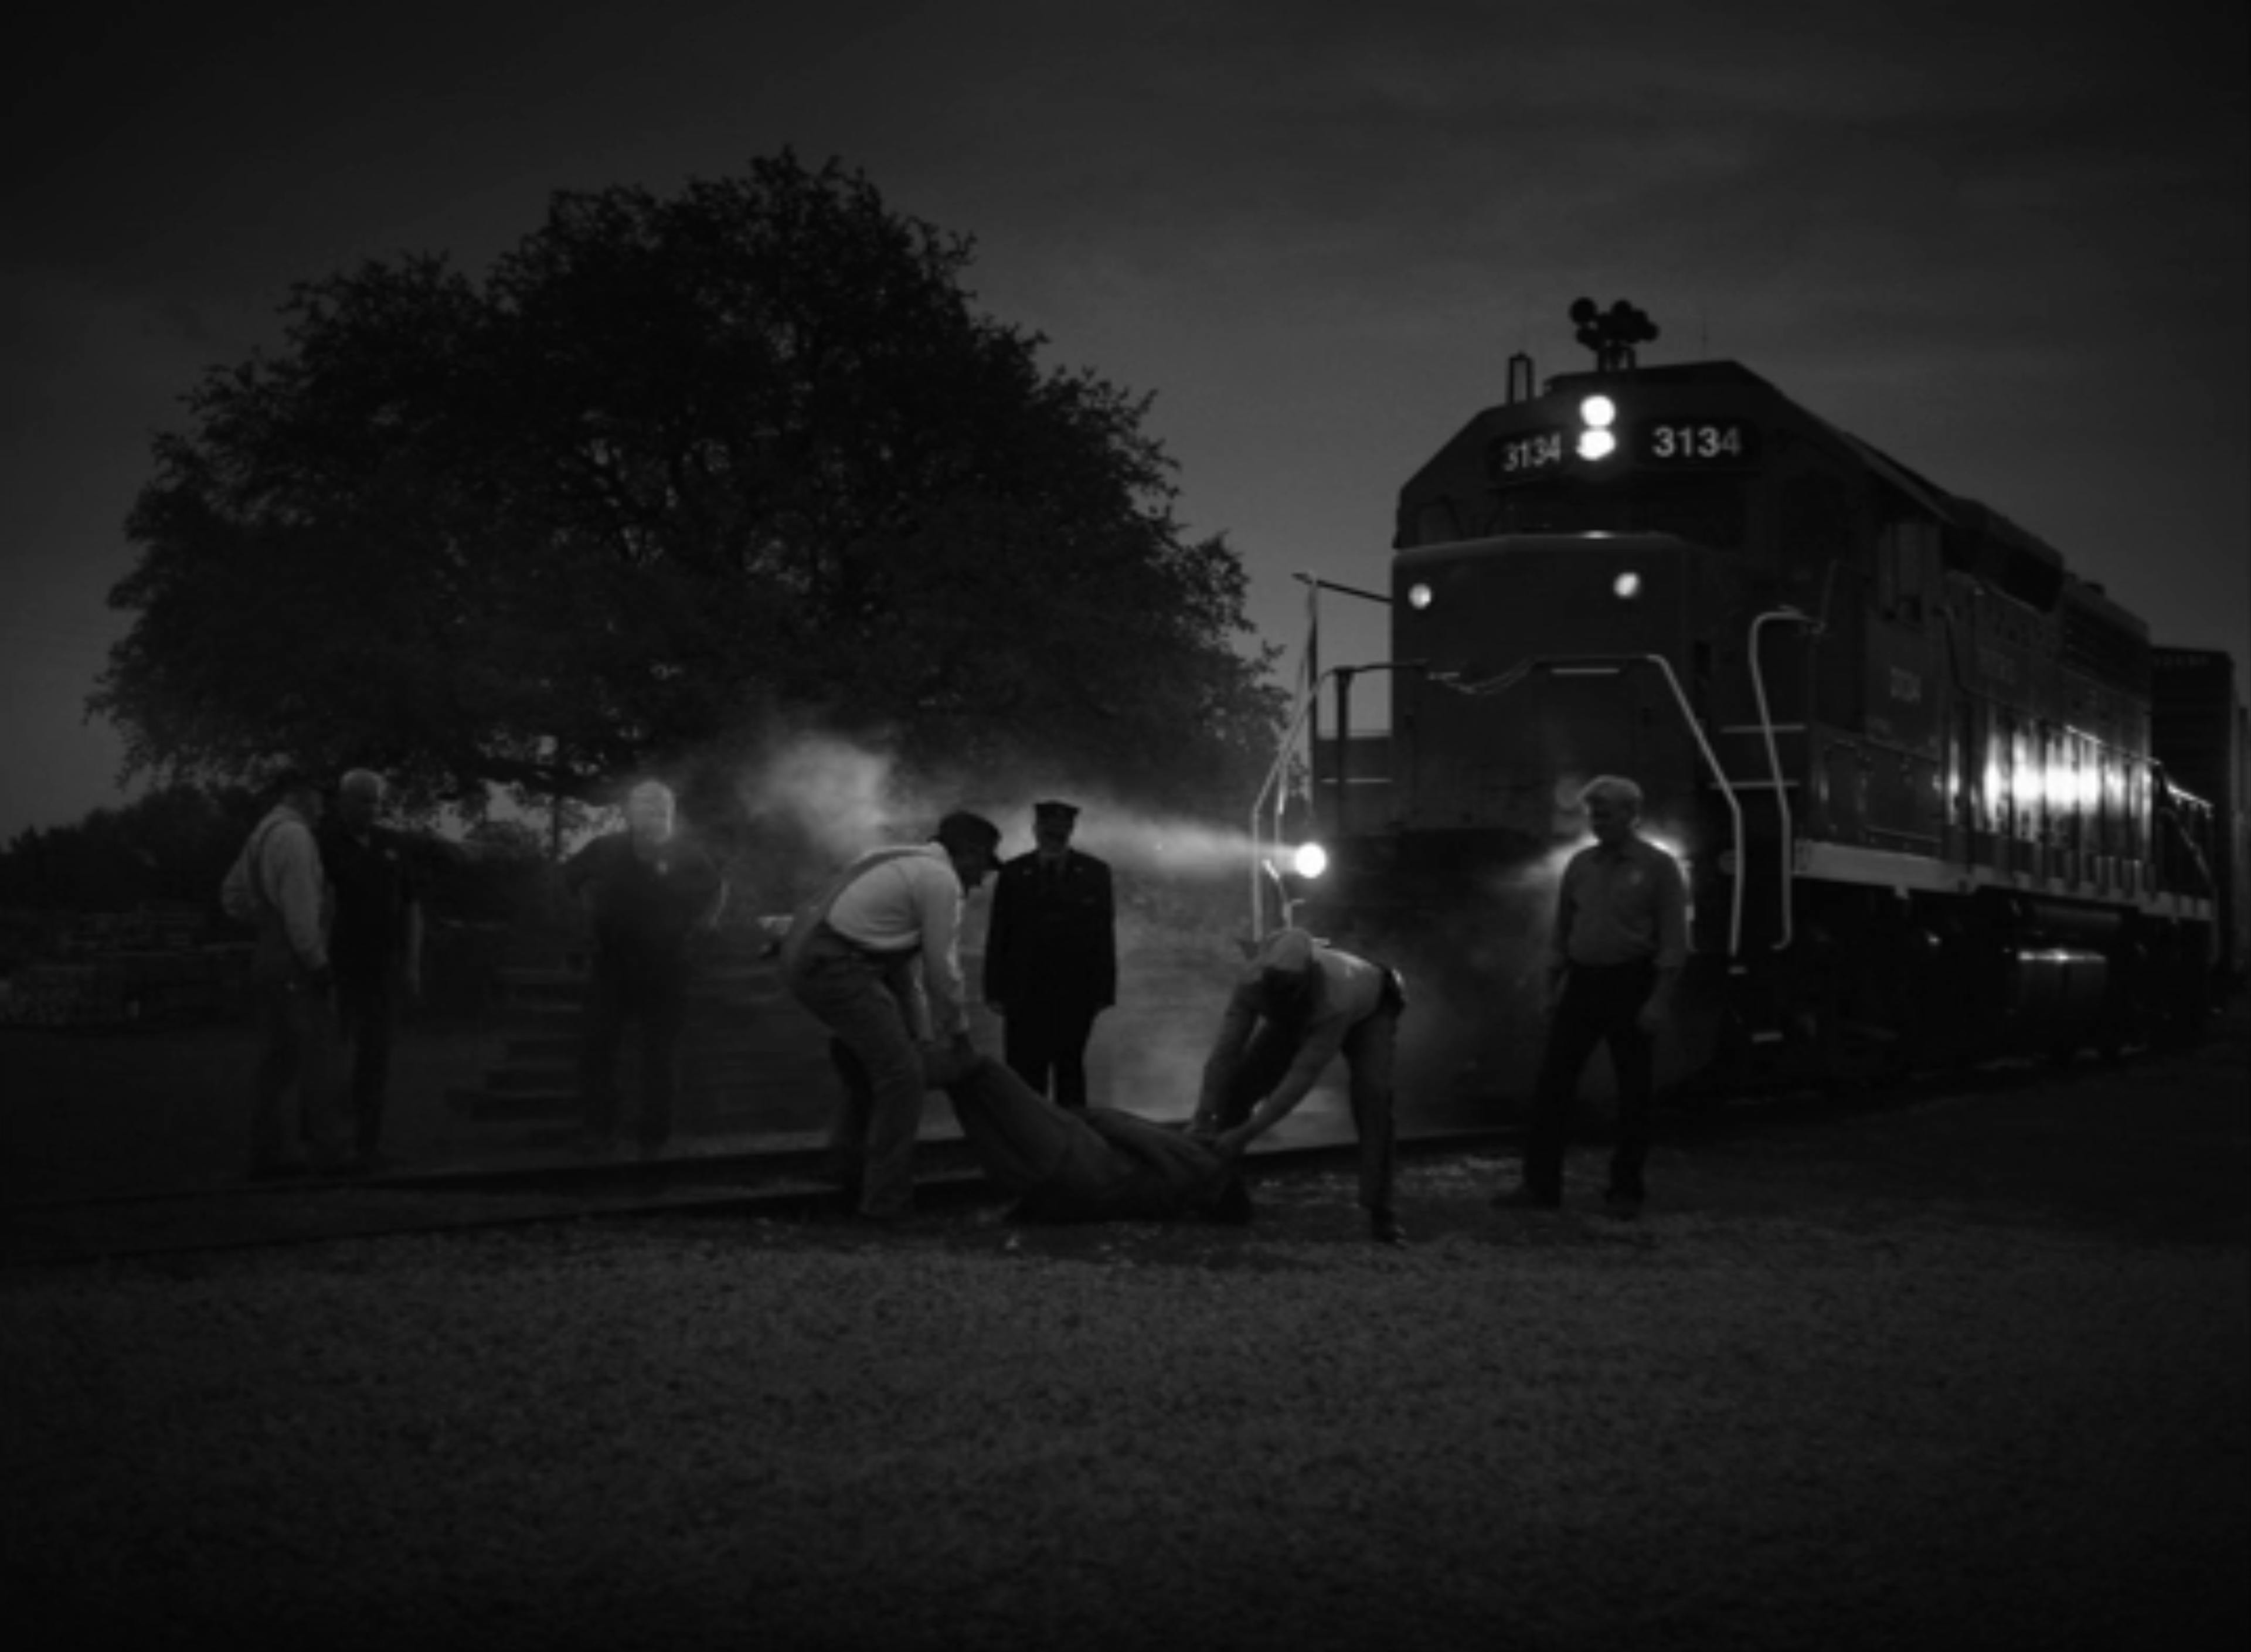 A black and white image of train workers dragging something off the tracks and a train right behind them